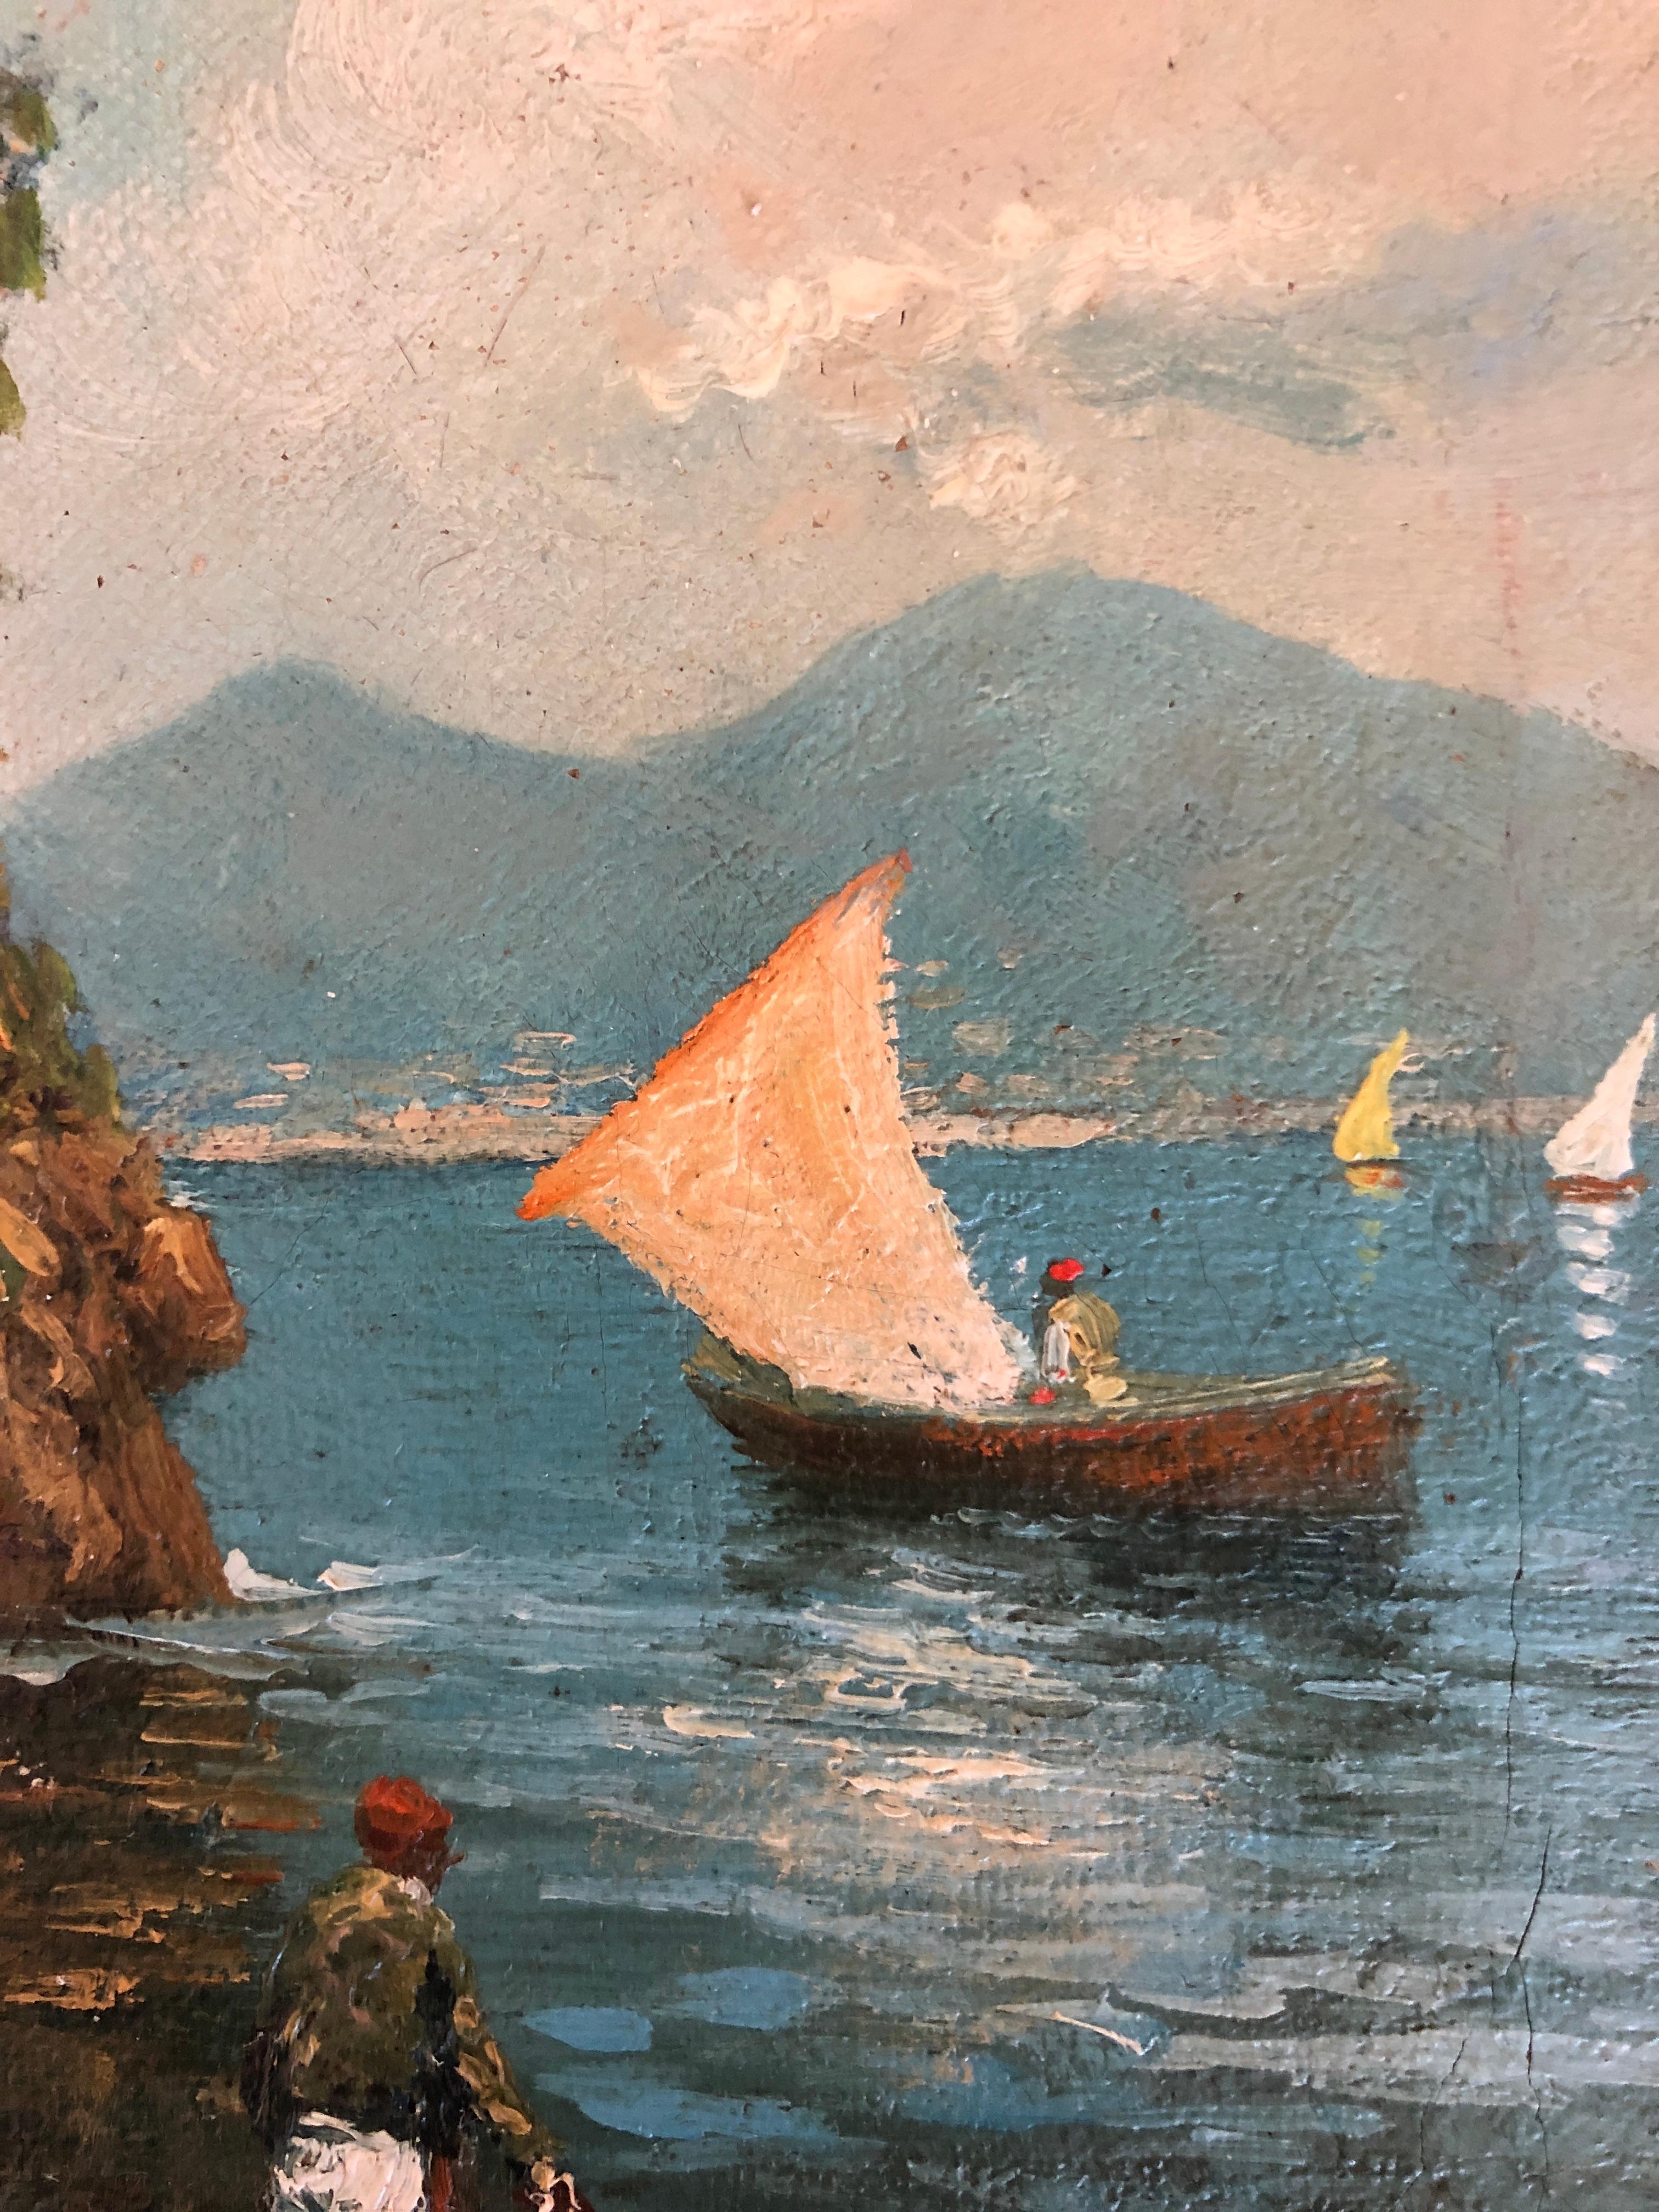 Bay of Naples and fishermen - Modern Painting by Roberto Scognamiglio